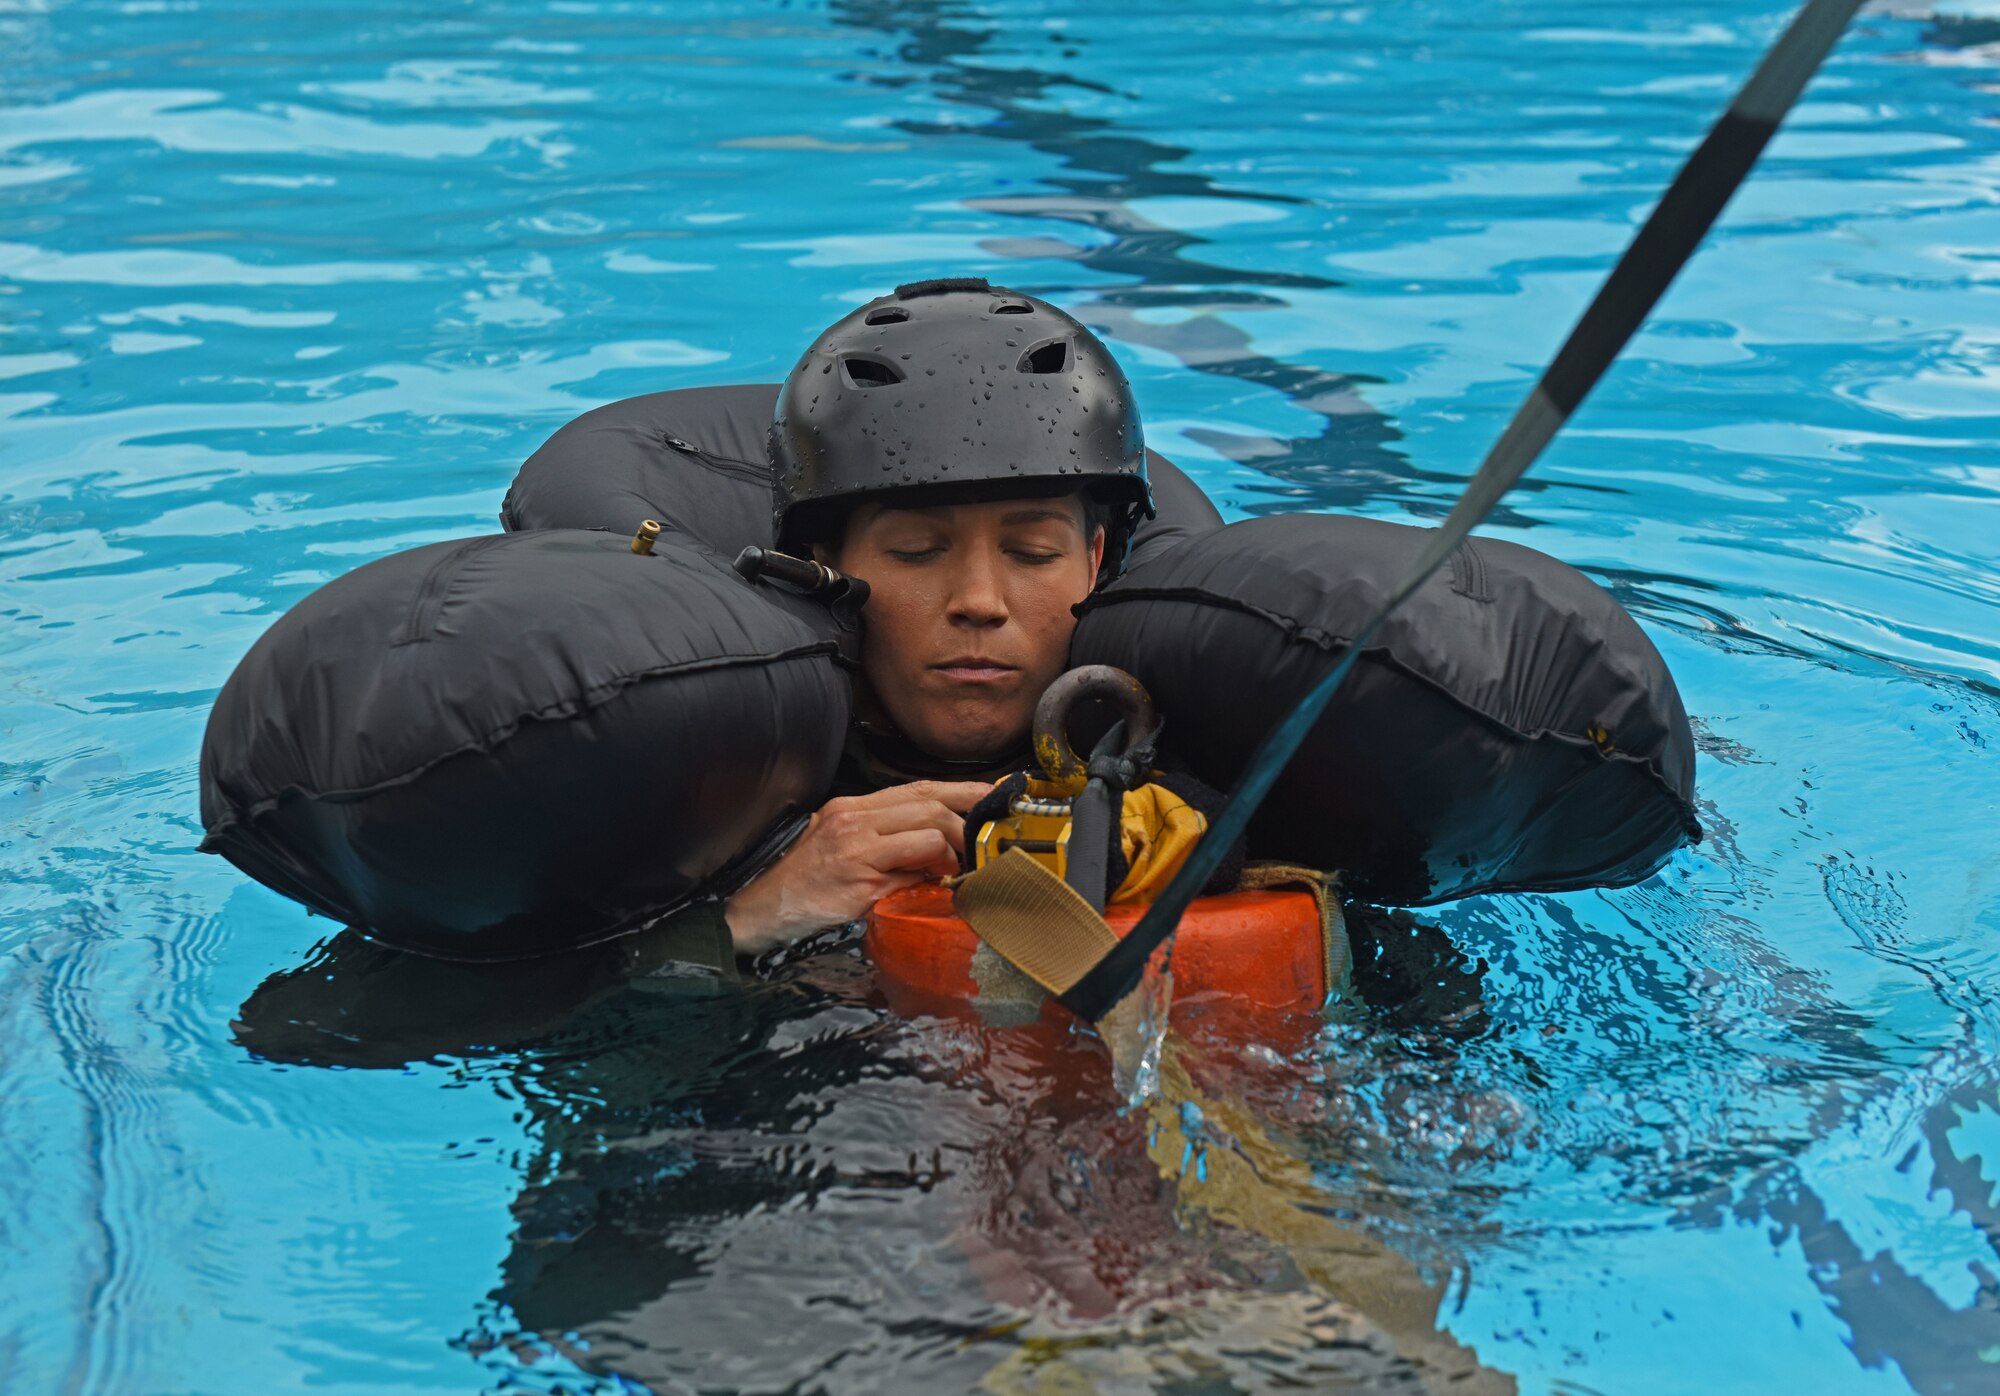 U.S. Air Force Capt. Zoe Kotnik, 55th Fighter Squadron chief of training, simulates being pulled out of water by a rescue helicopter at Shaw Air Force Base, S.C., July 19, 2018.